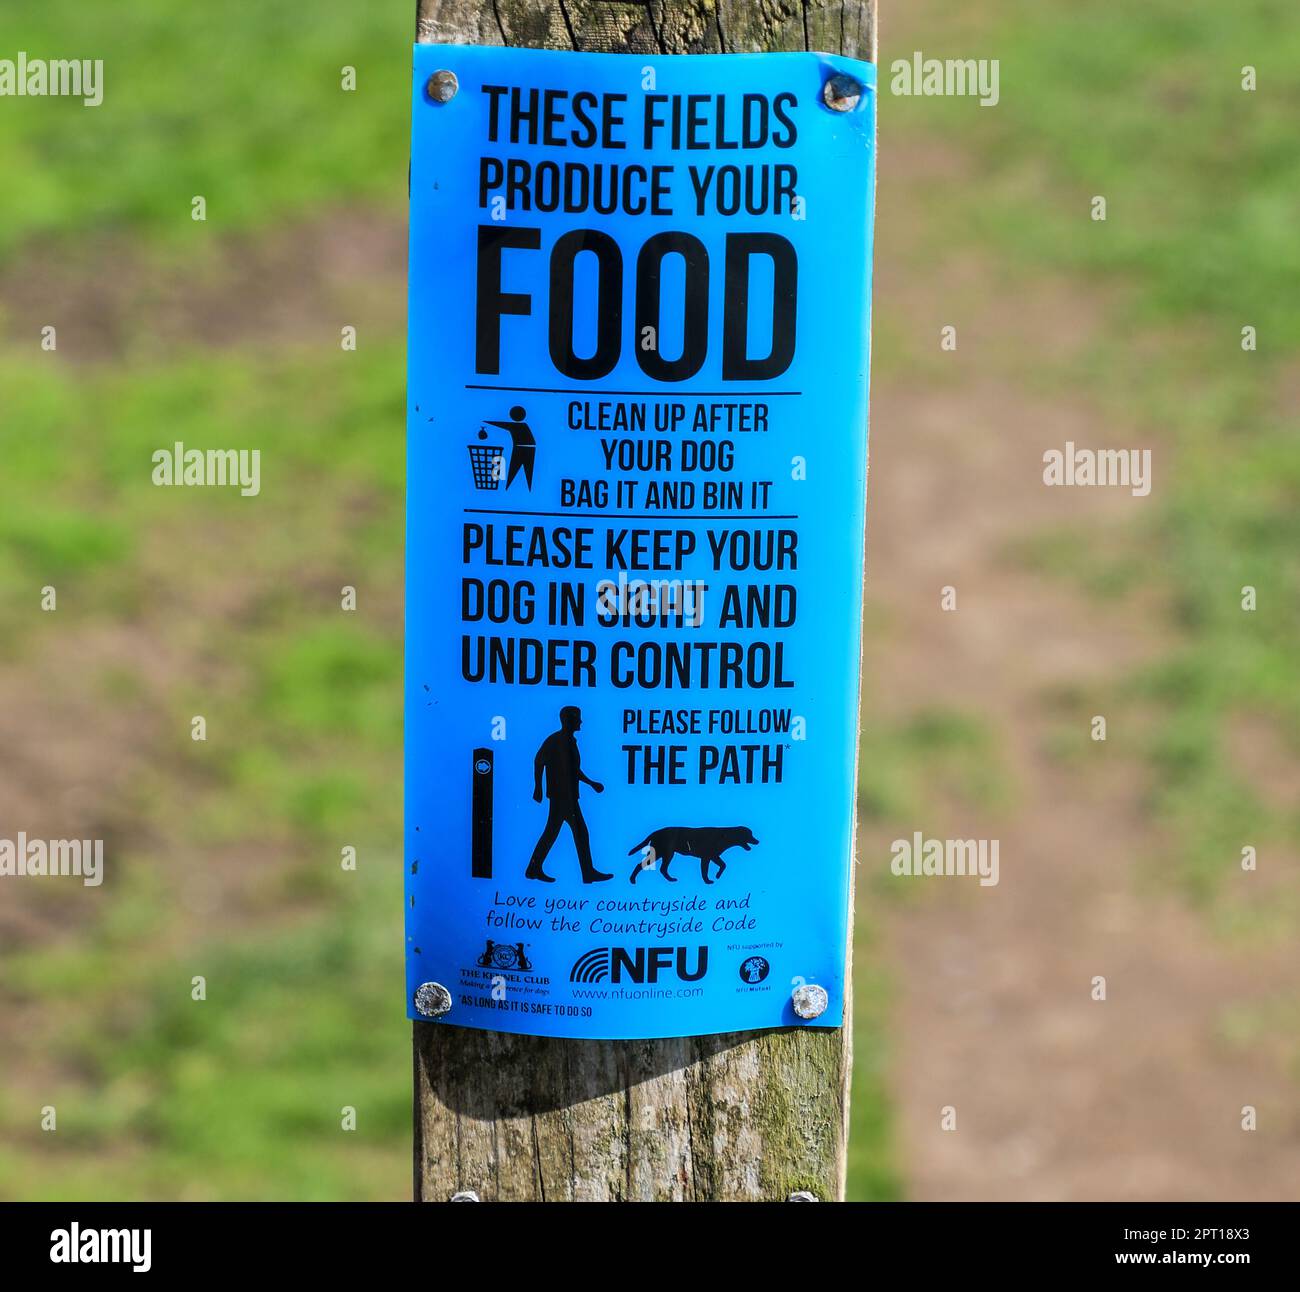 A sign on a wooden post saying 'these fields produce food - please control your dog' and 'clean up after your dog' 'bag it and bin it', England, UK Stock Photo